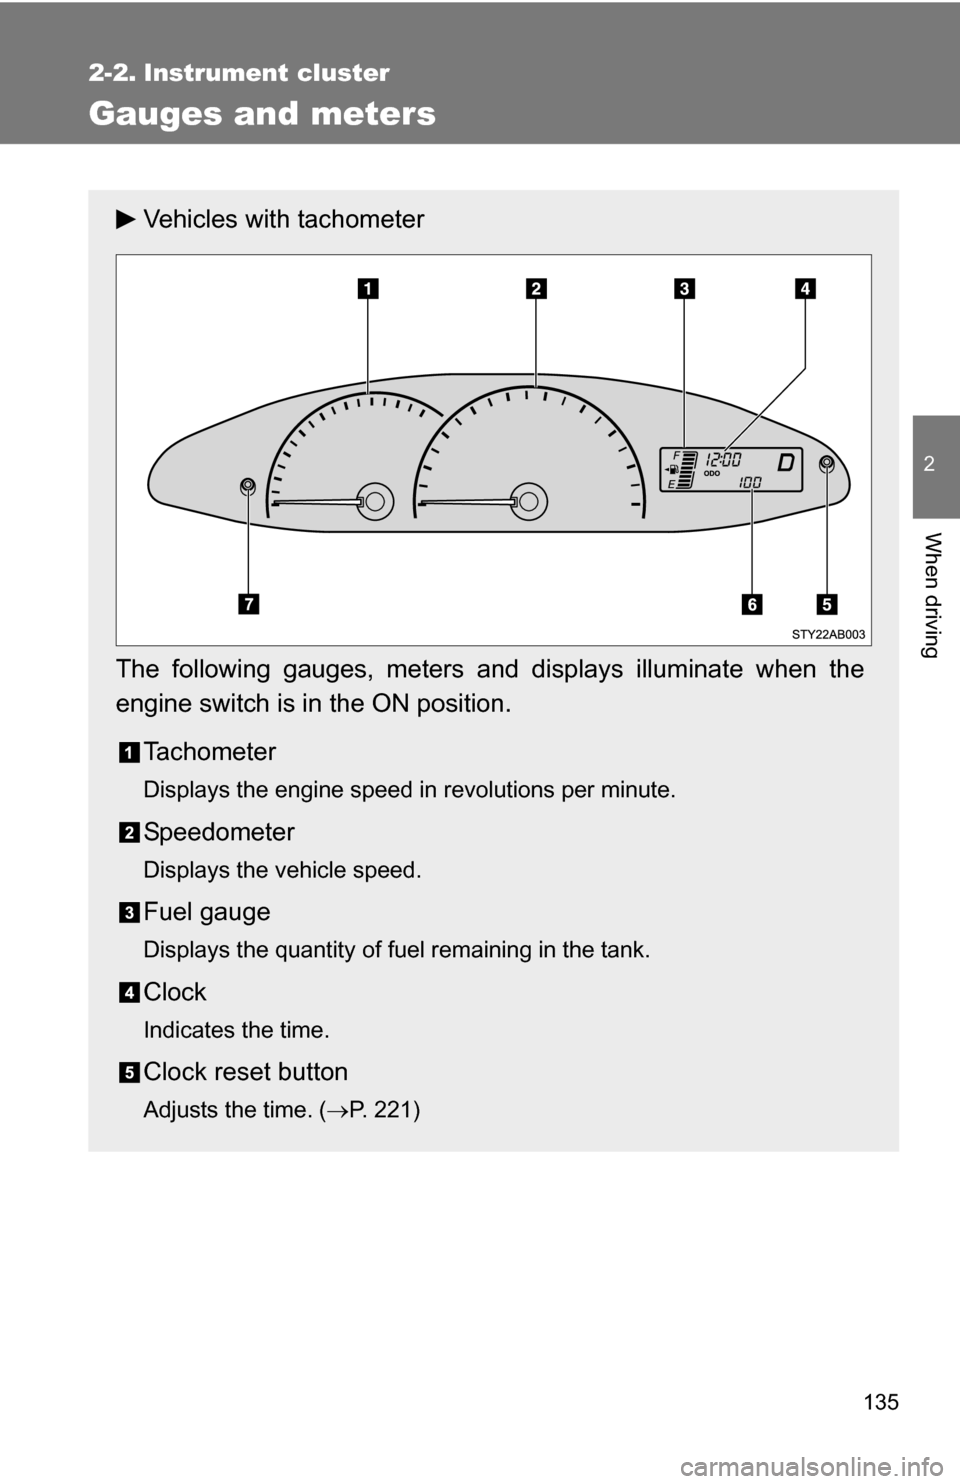 TOYOTA YARIS 2009 2.G Owners Manual 135
2
When driving
2-2. Instrument cluster
Gauges and meters
Vehicles with tachometer
The following gauges, meters and displays illuminate when the
engine switch is in the ON position. Tachometer
Disp